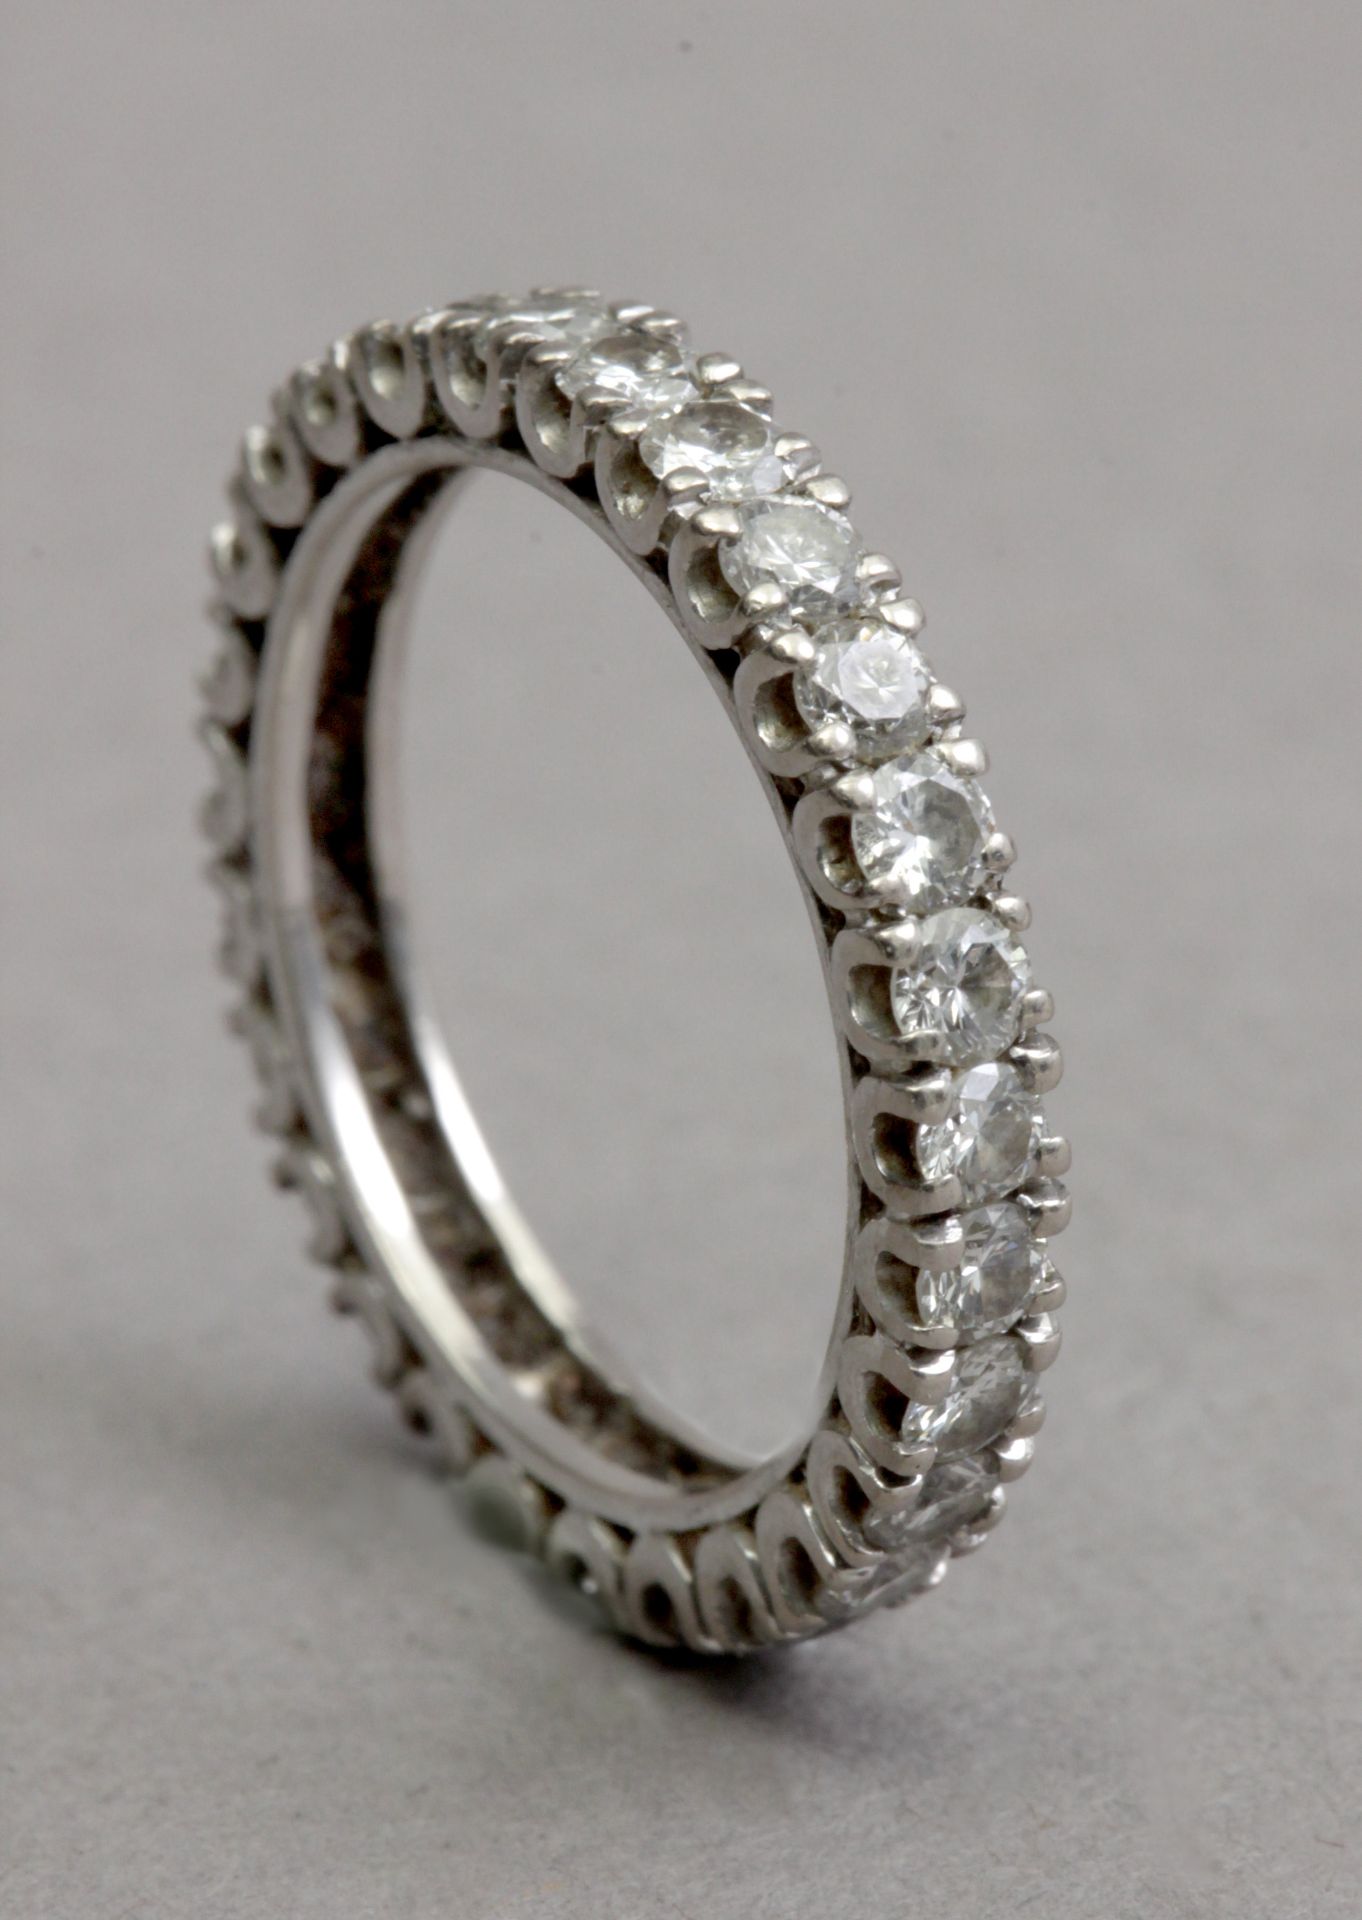 A diamond eternity ring with an 18k. white gold setting